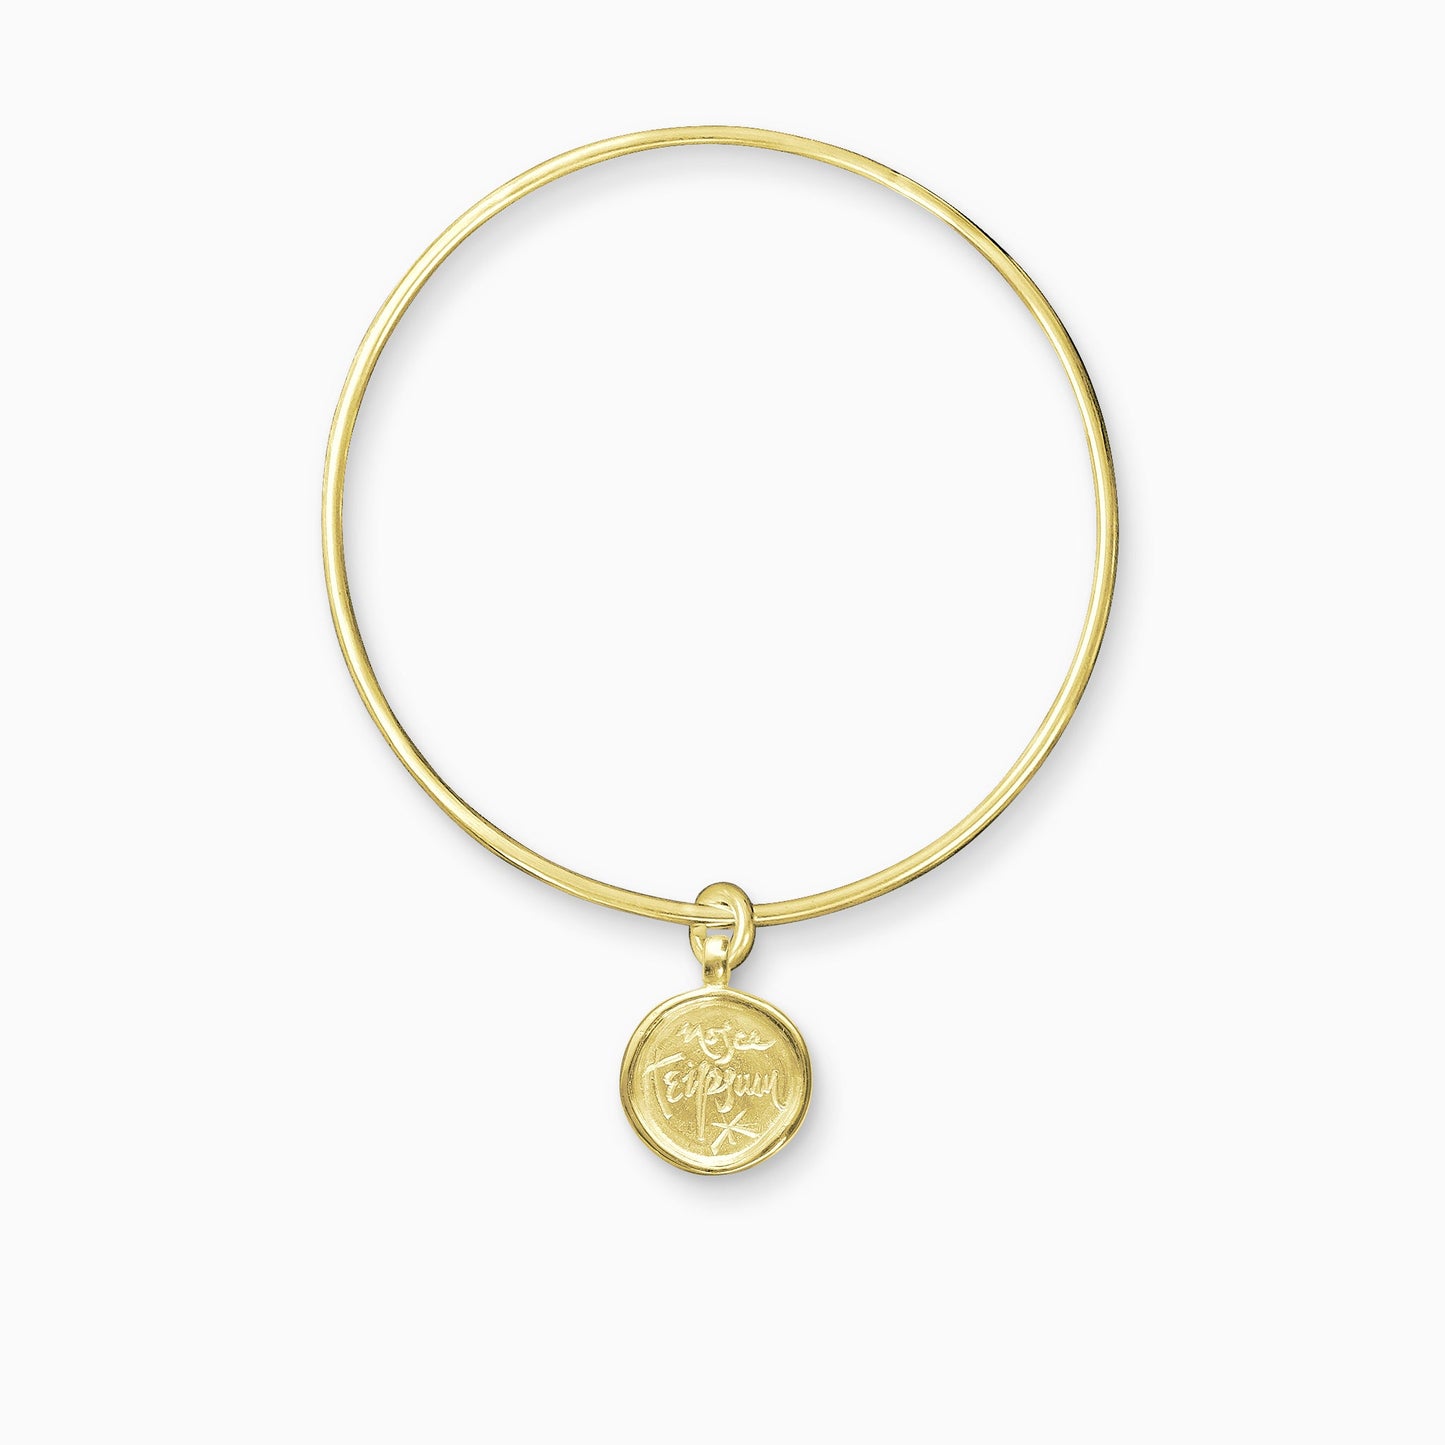 An 18ct Fairtrade yellow gold round charm with a raised edge engraved with ‘Know Thyself’ freely moving on a round wire bangle.  Charm 15mm. Bangle 63mm inside diameter x 2mm round wire.